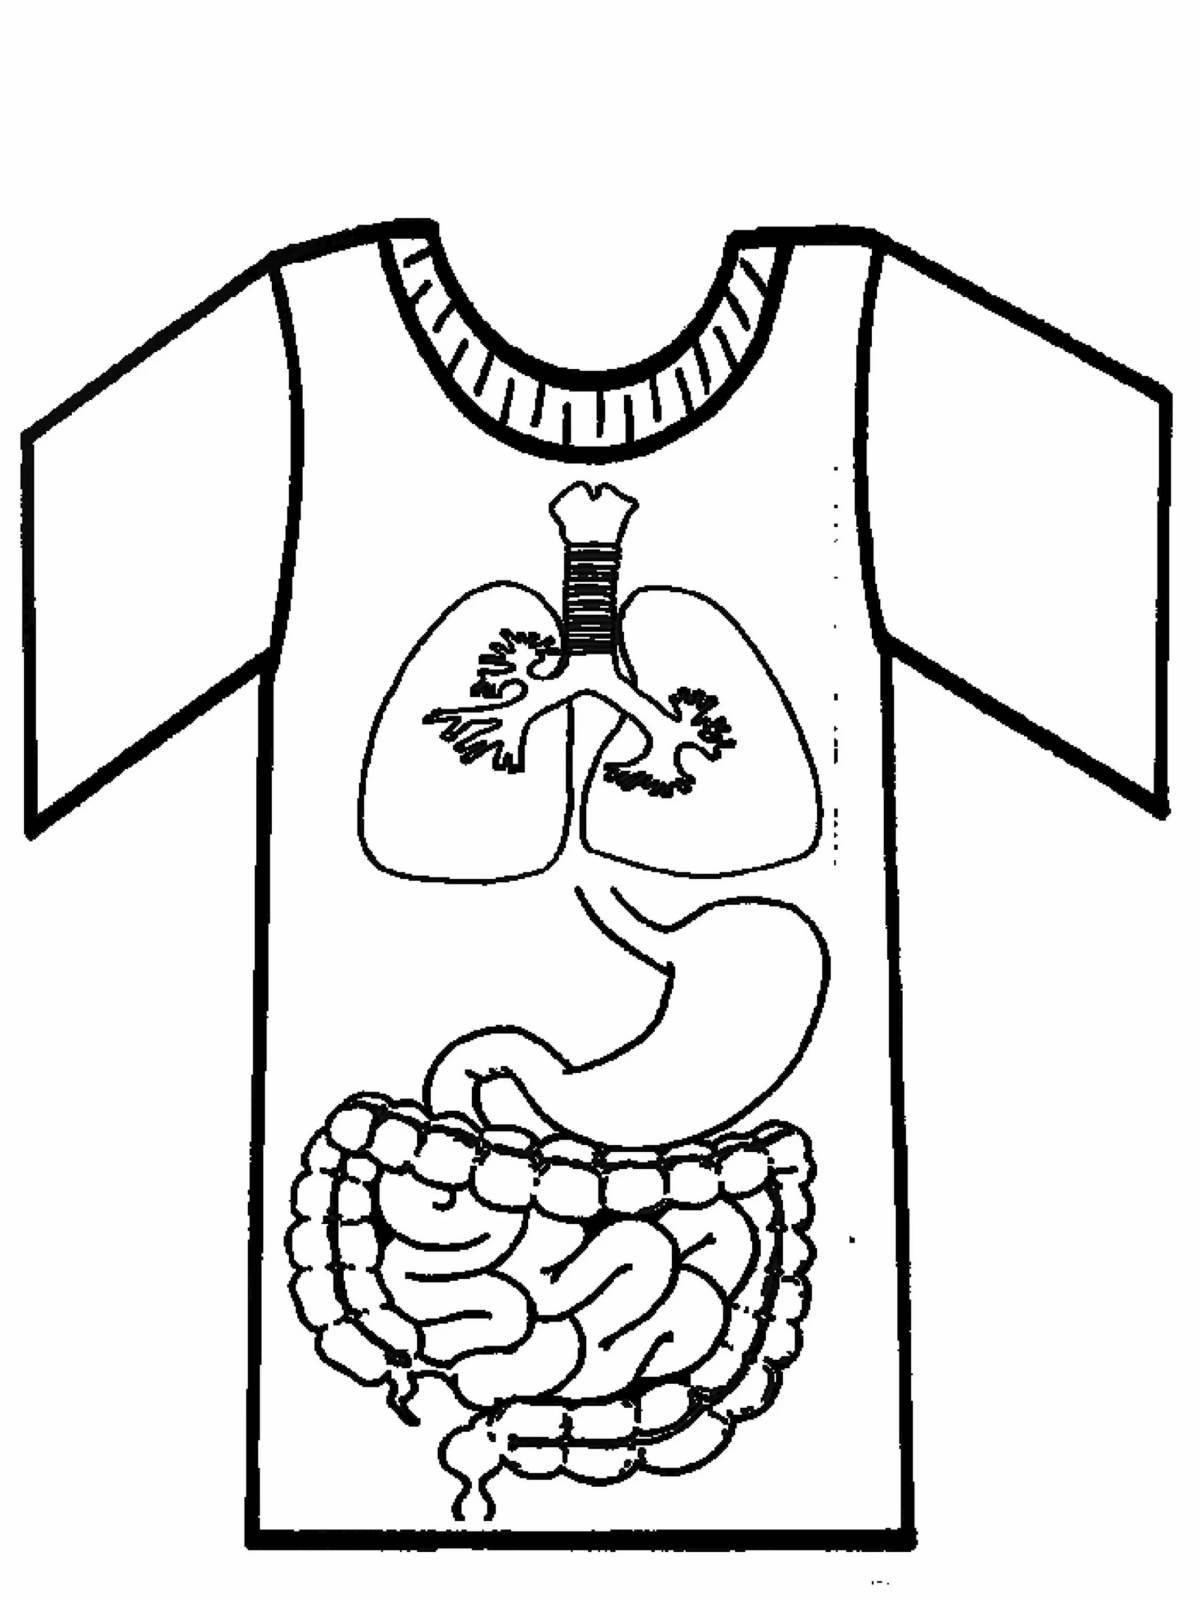 A fascinating coloring book of the human body with internal organs for children